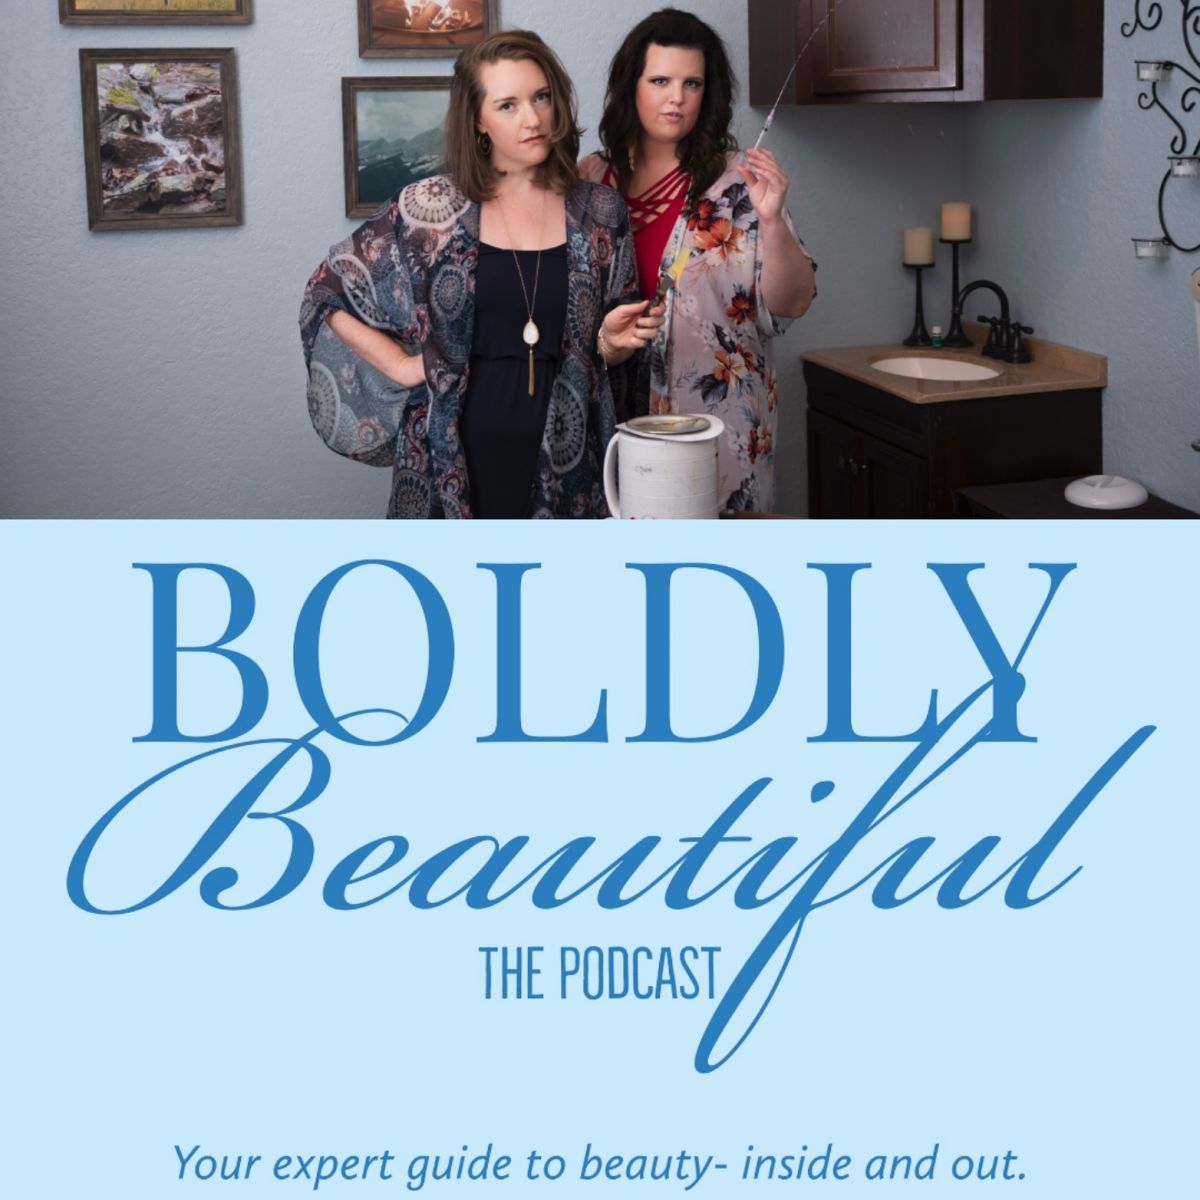 The Boldly Beautiful Podcast